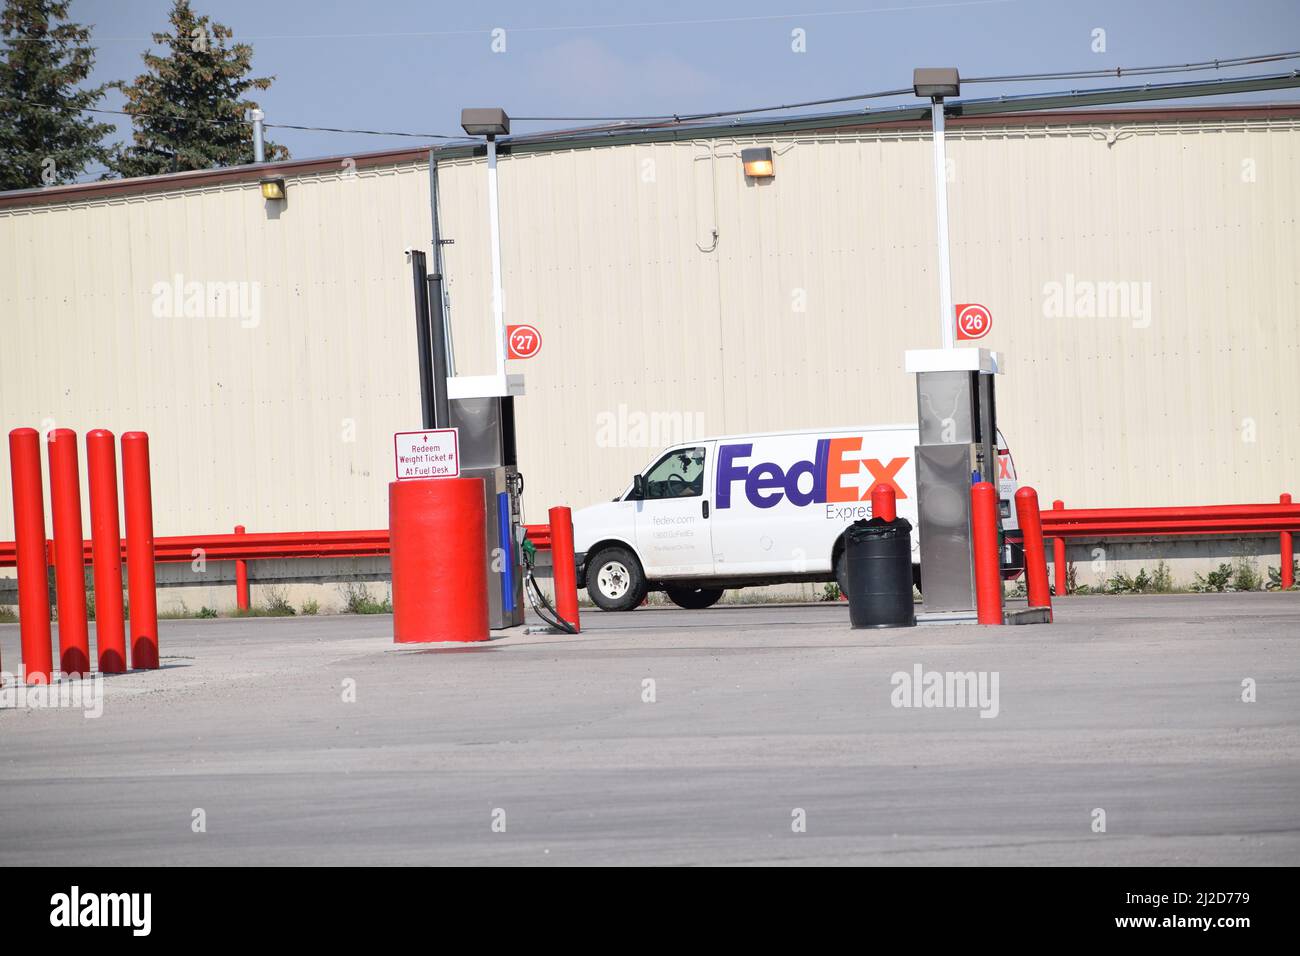 A FedEx van at Sapp Bros Truck Stop on the east side of Cheyenne Wyoming; August 2021 Stock Photo